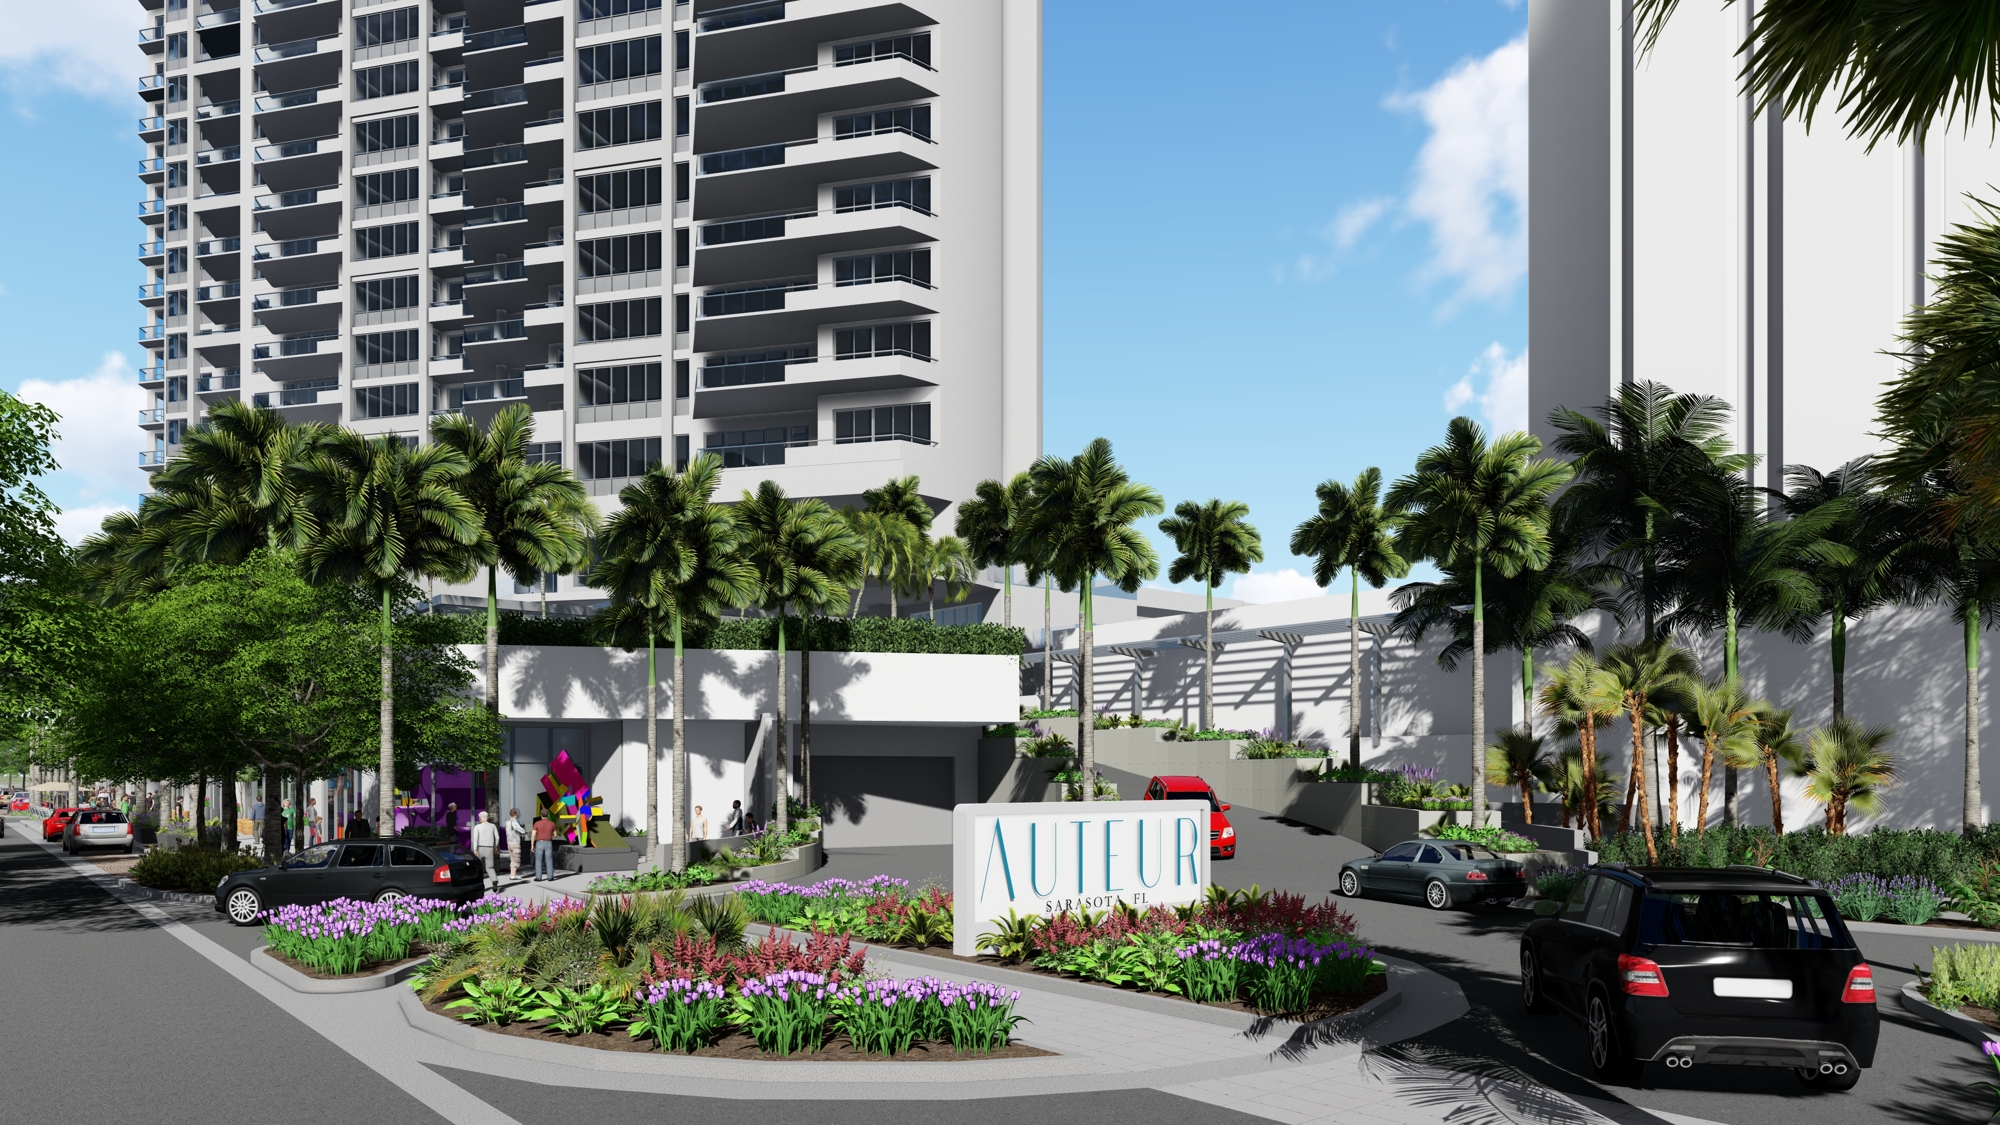 The project includes landscaping designed to create an improved pedestrian-level experience.